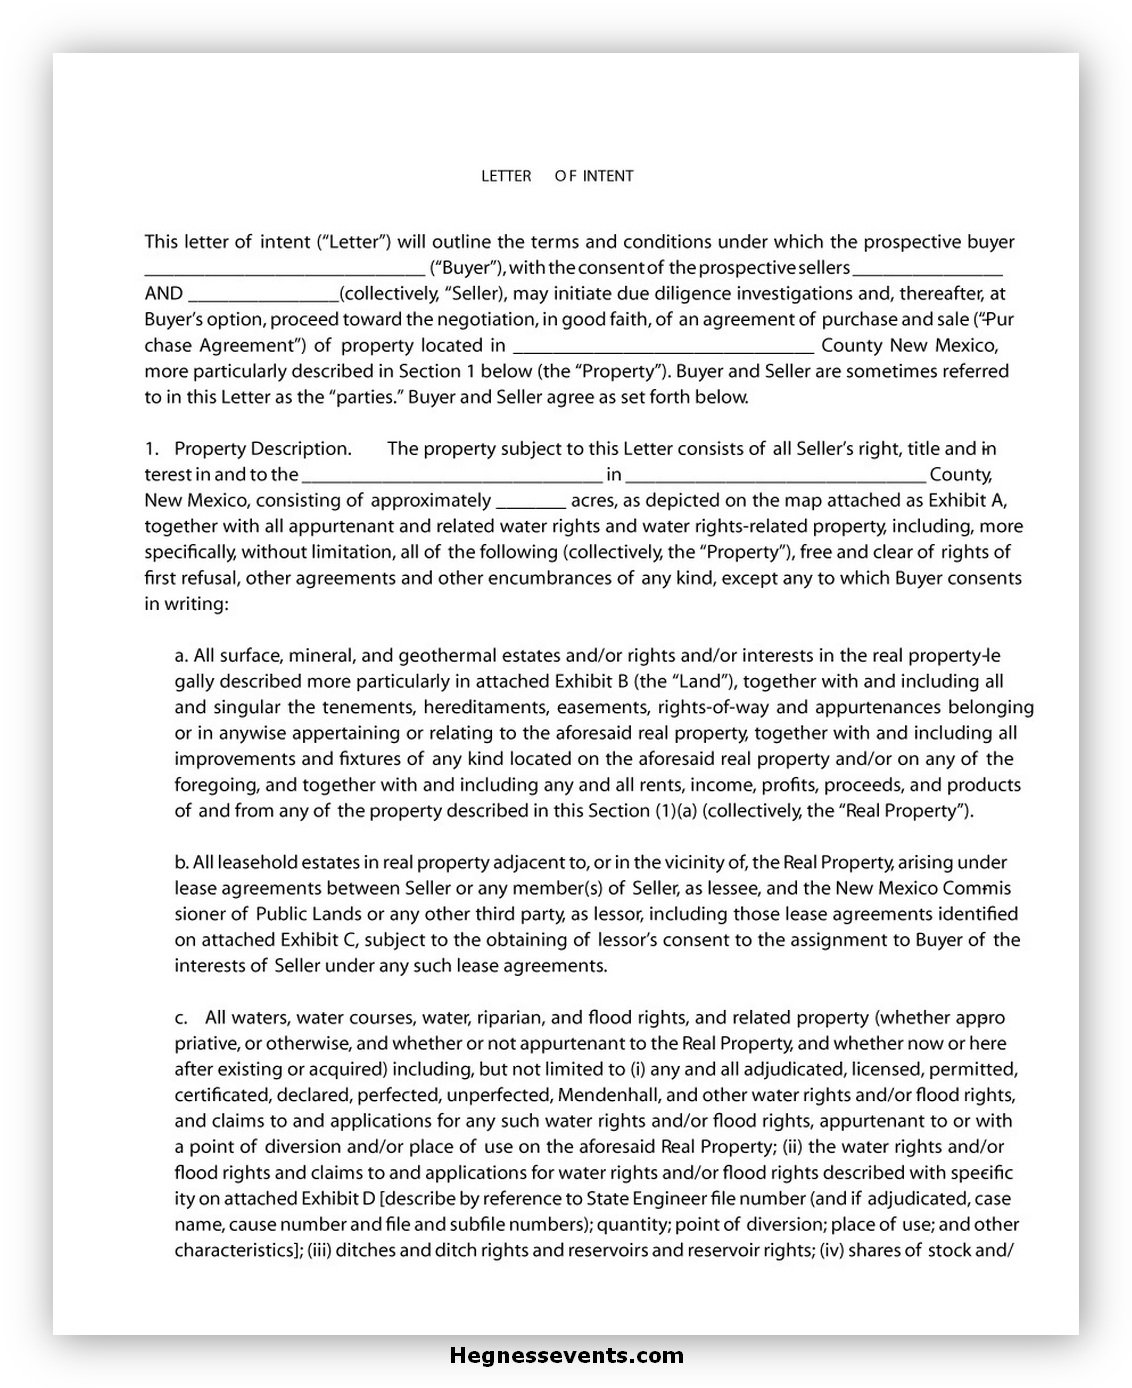 Letter of Intent Template 10